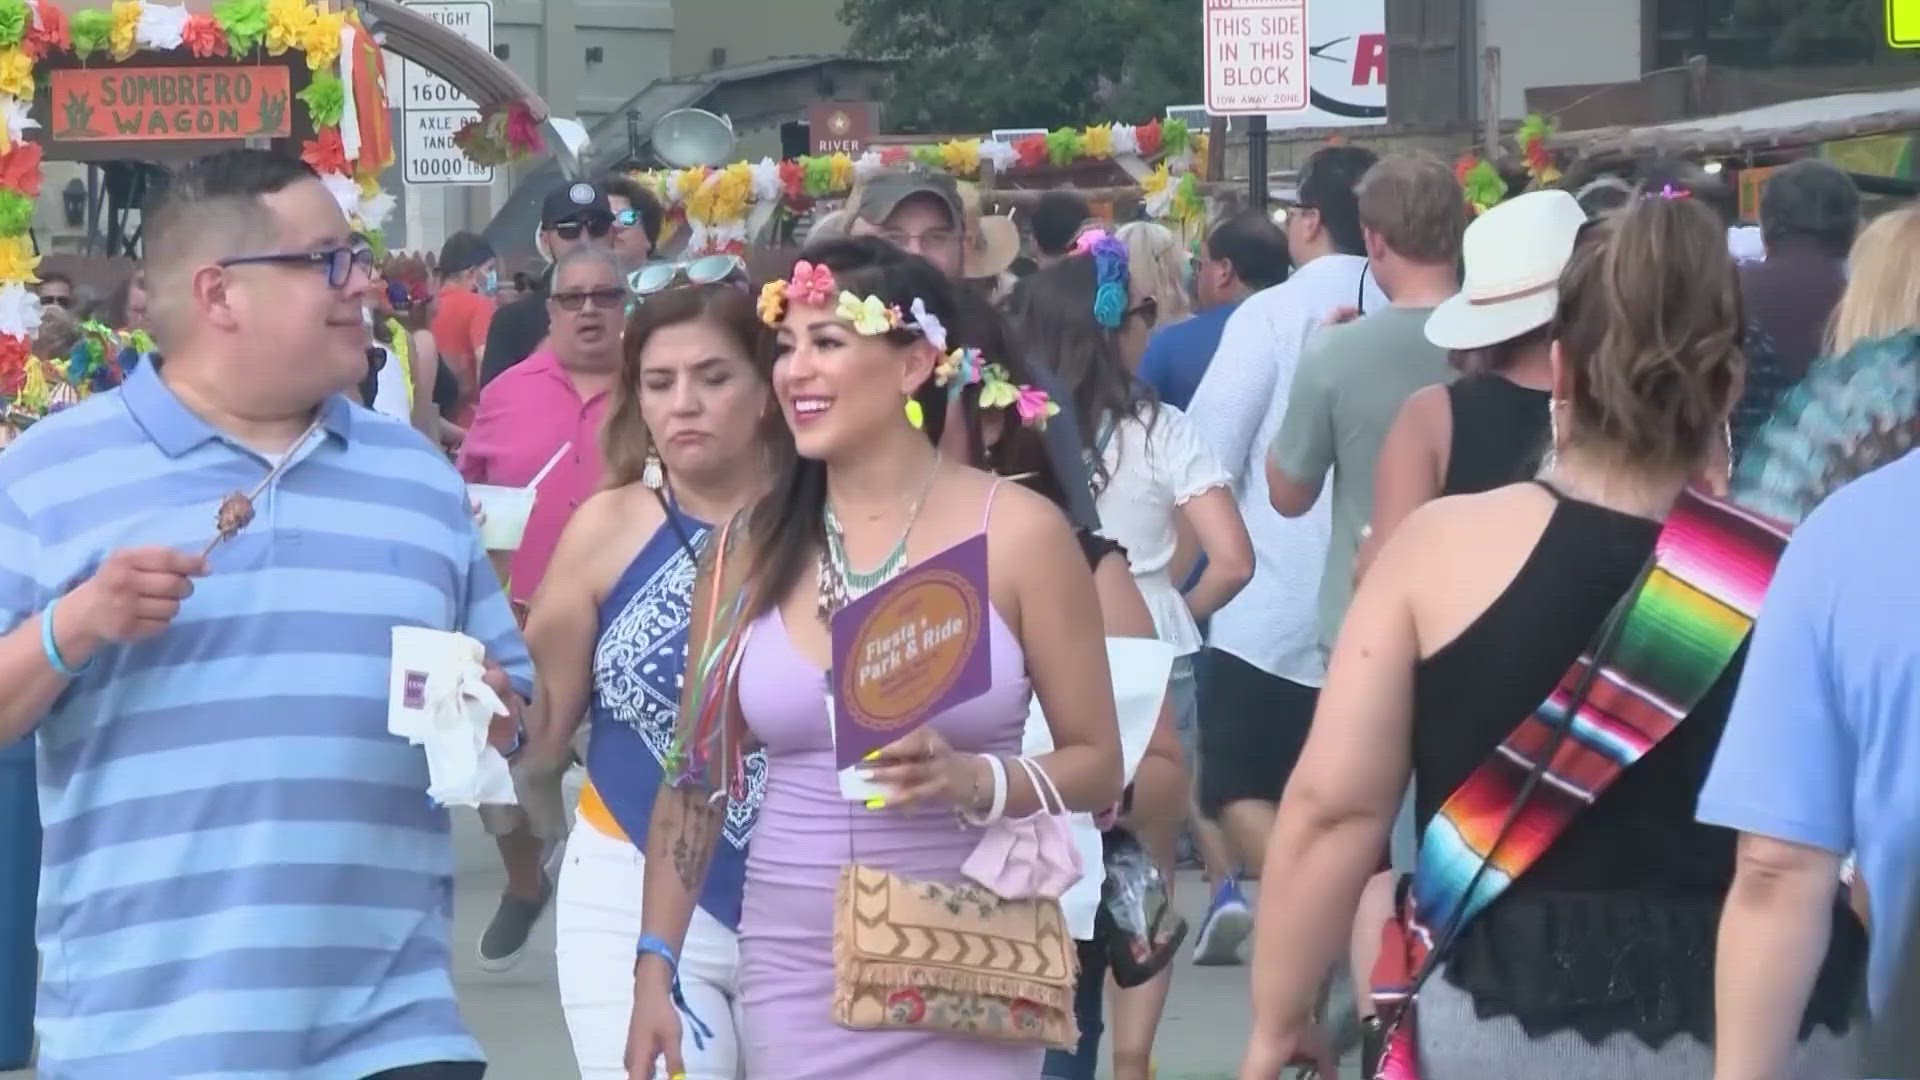 What you need to know to make the most of one of the biggest parties at Fiesta.